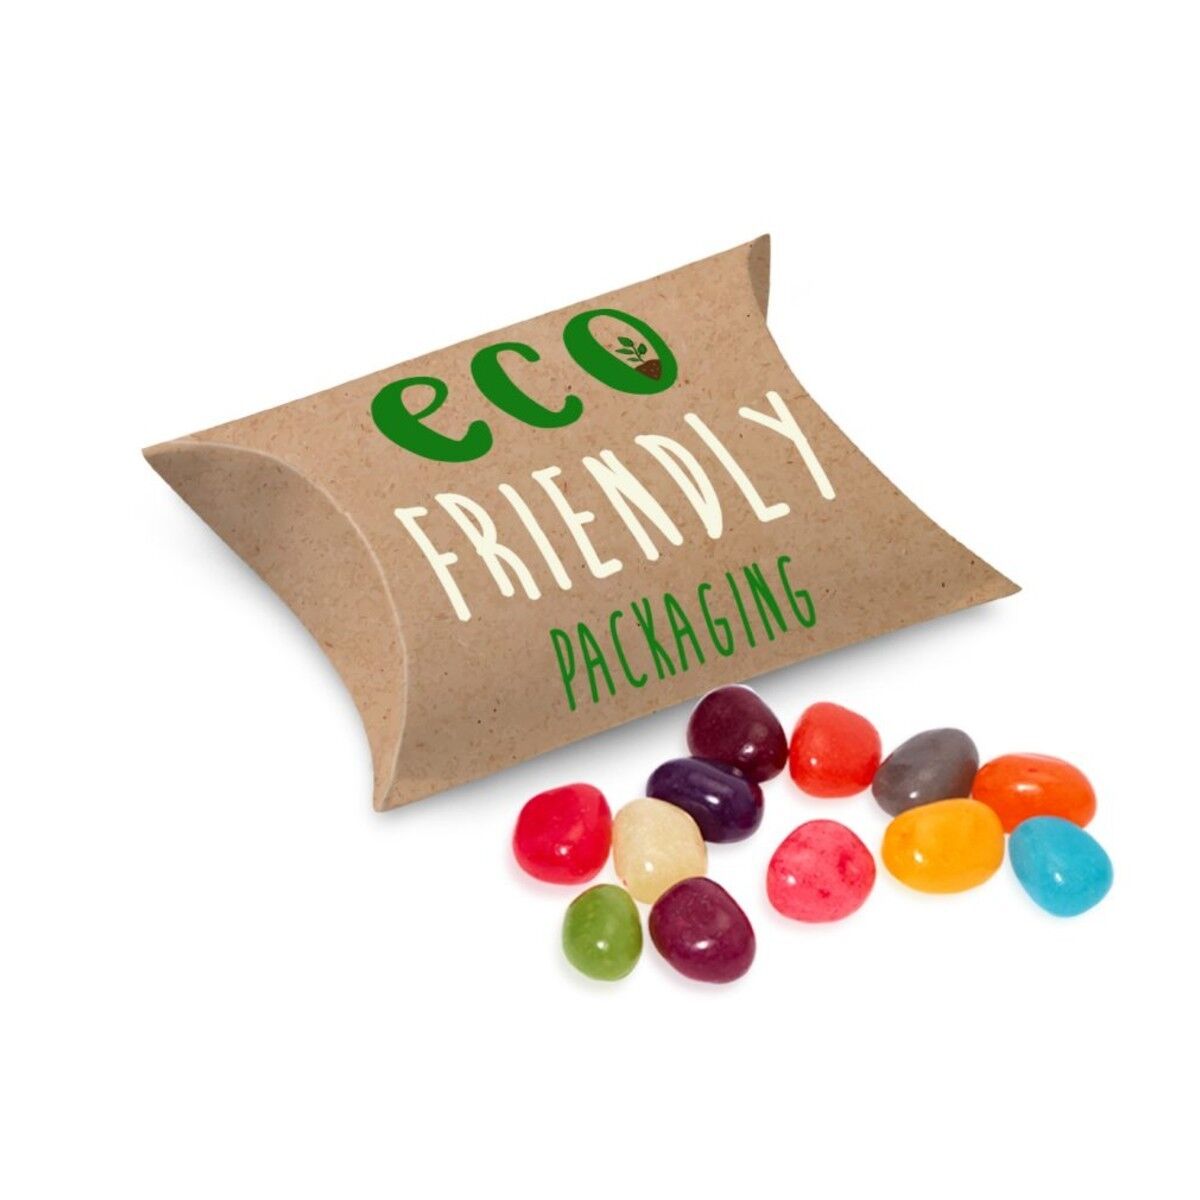 Biodegradable Card Pouch filled with The Jelly Bean Factory